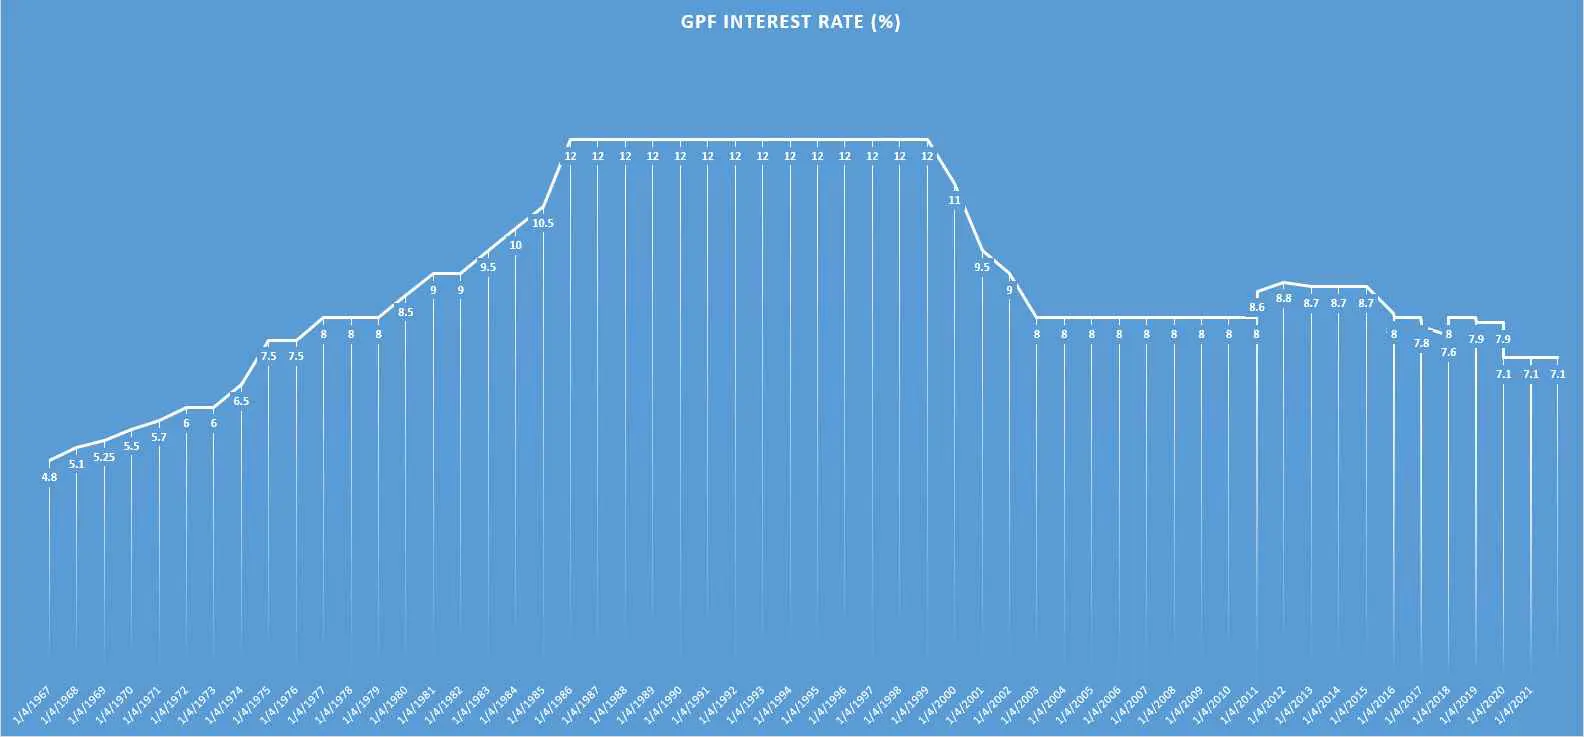 GPF Interest Rate 1967 to till date